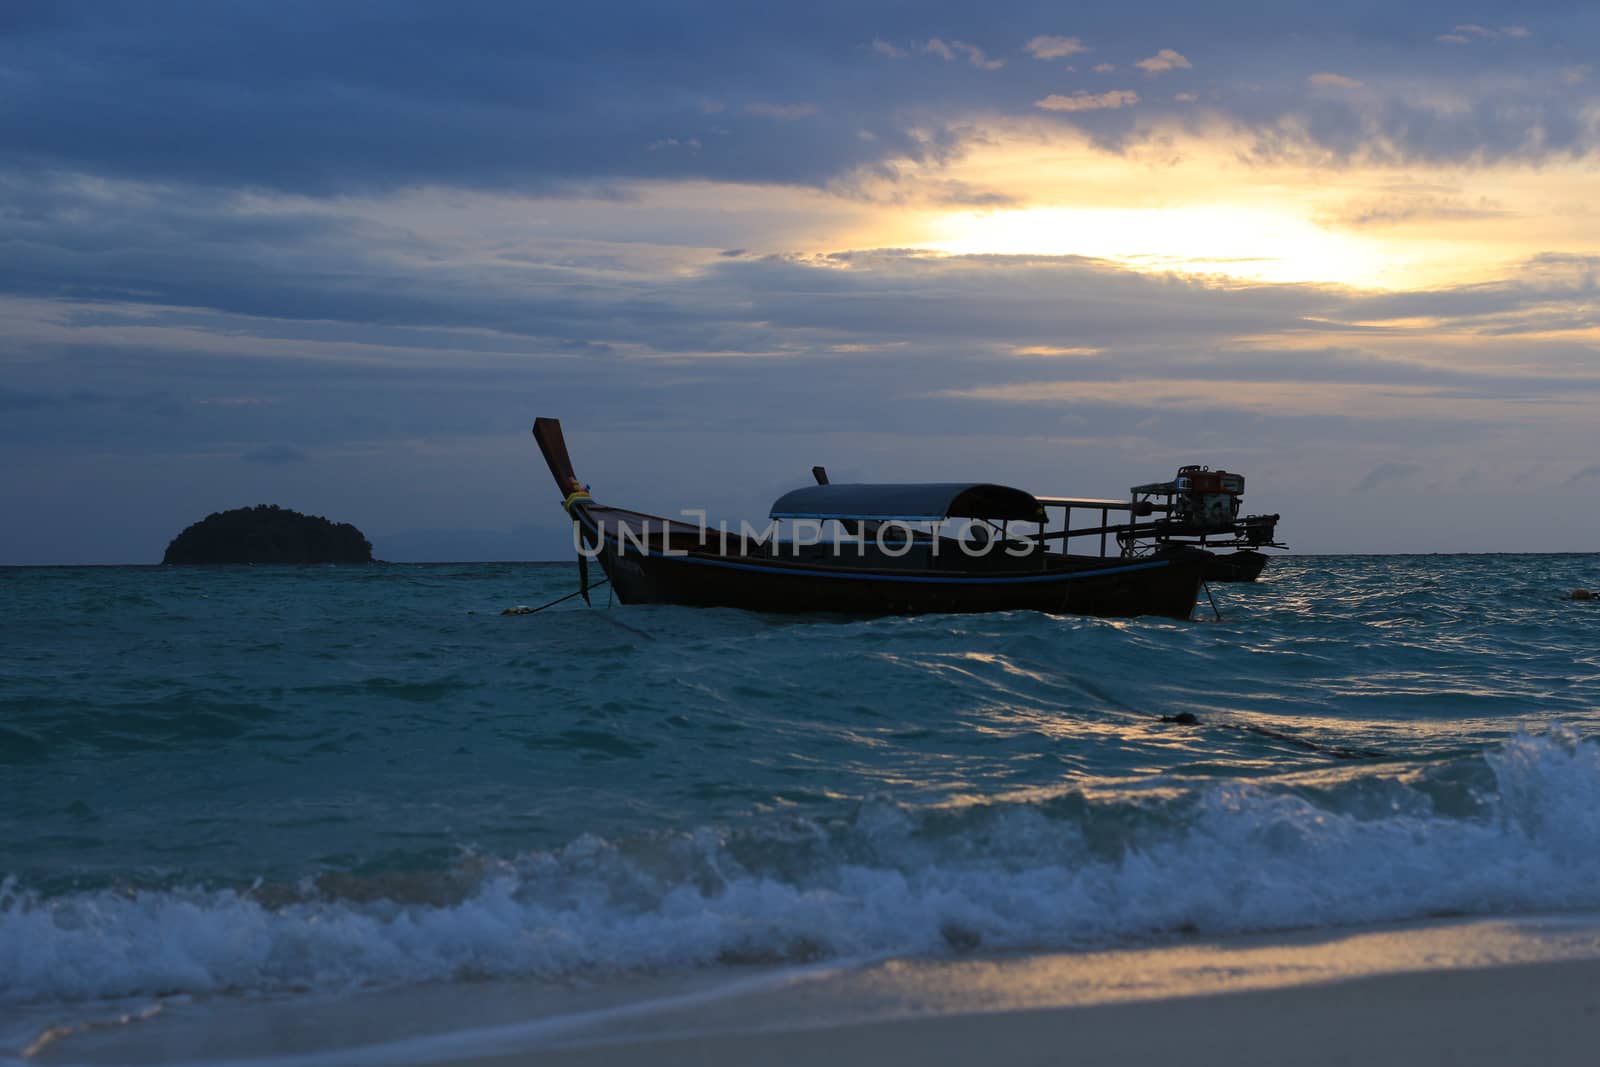 Boat in the sea with sunrise and island background